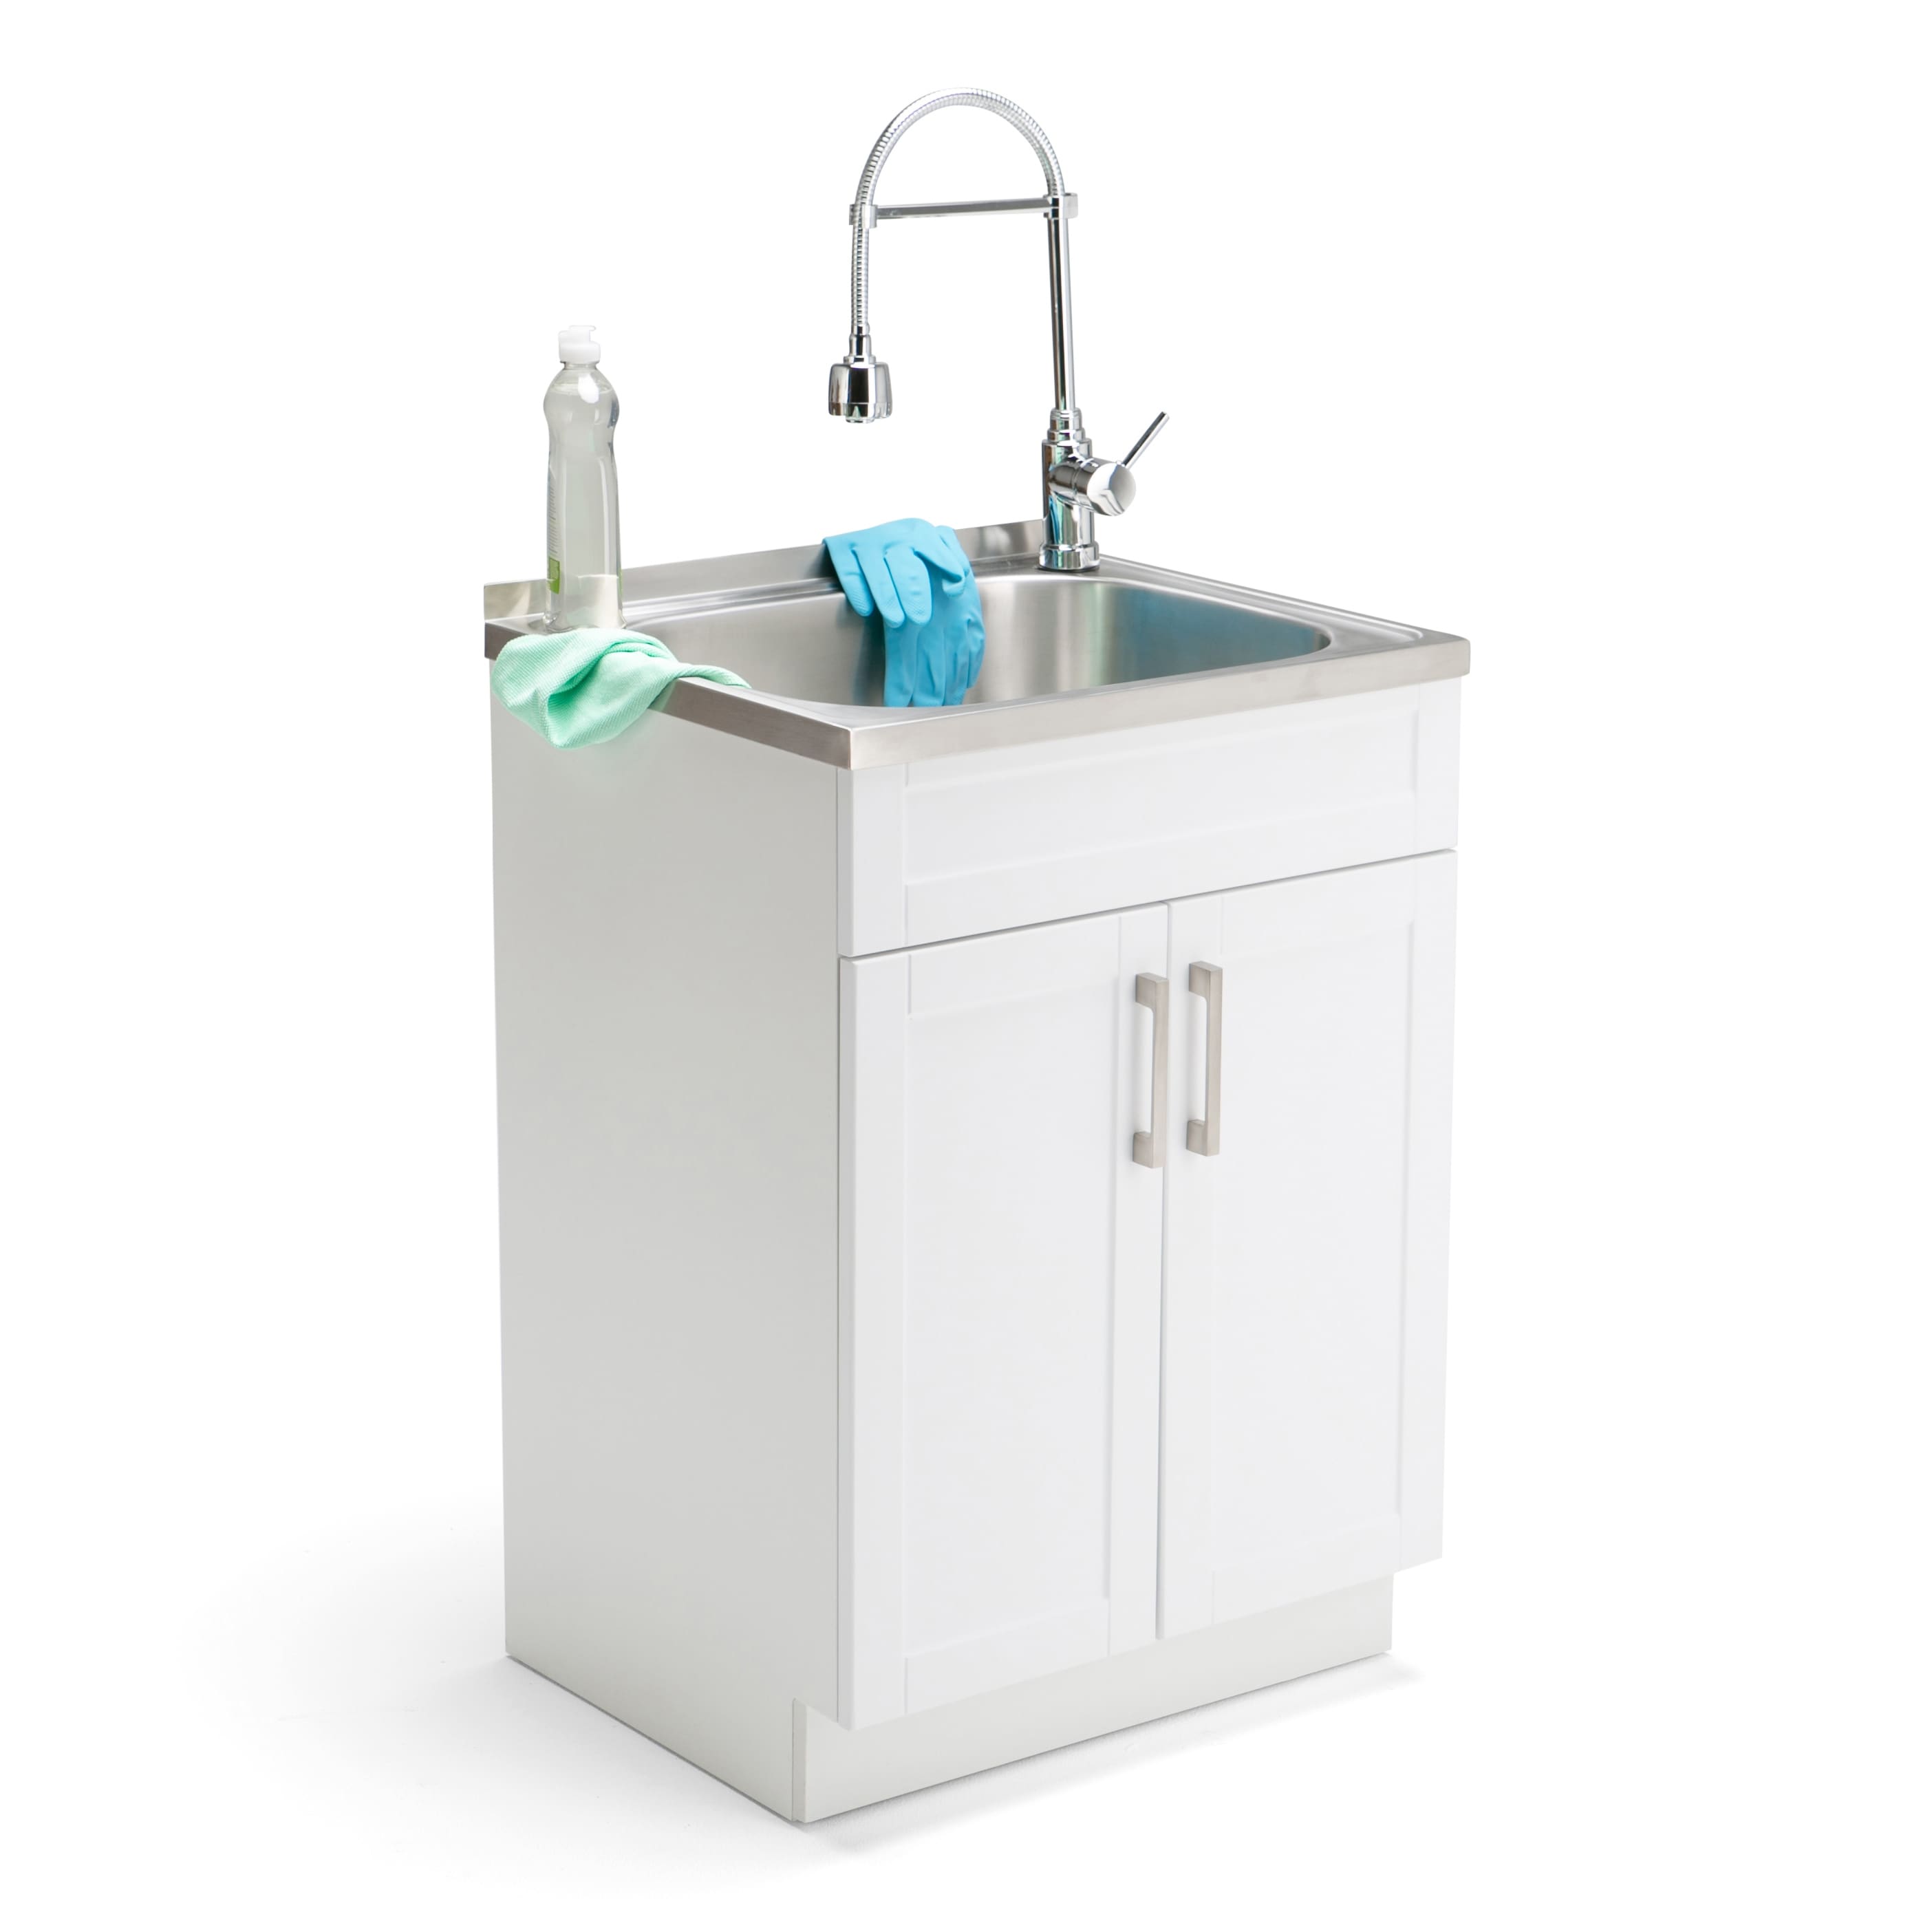 https://ak1.ostkcdn.com/images/products/is/images/direct/c83117767abfe972577c5ad1d36c0b508f196893/WYNDENHALL-Hartland-Deluxe-Laundry-Cabinet-with-Faucet-and-Stainless-Steel-Sink.jpg